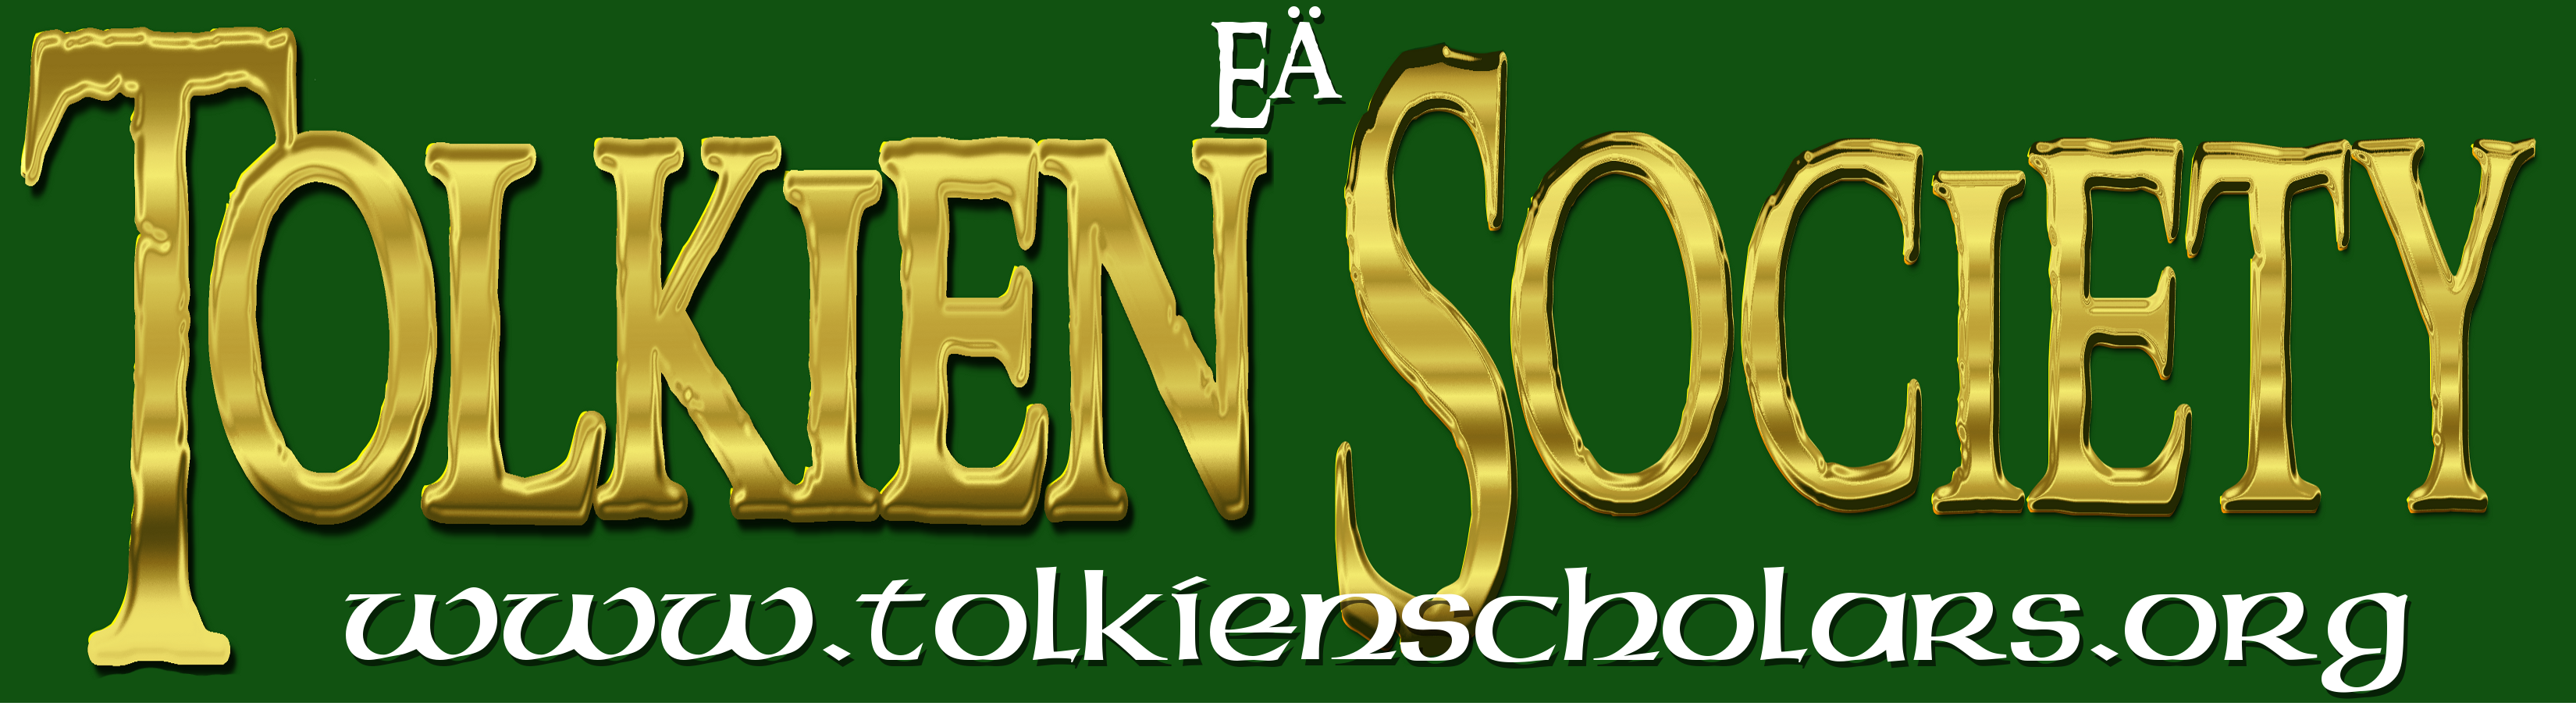 Reminder: Eä Tolkien Society Meeting & Broadcast May 22nd, 2021 1-3 pm Pacific Time 